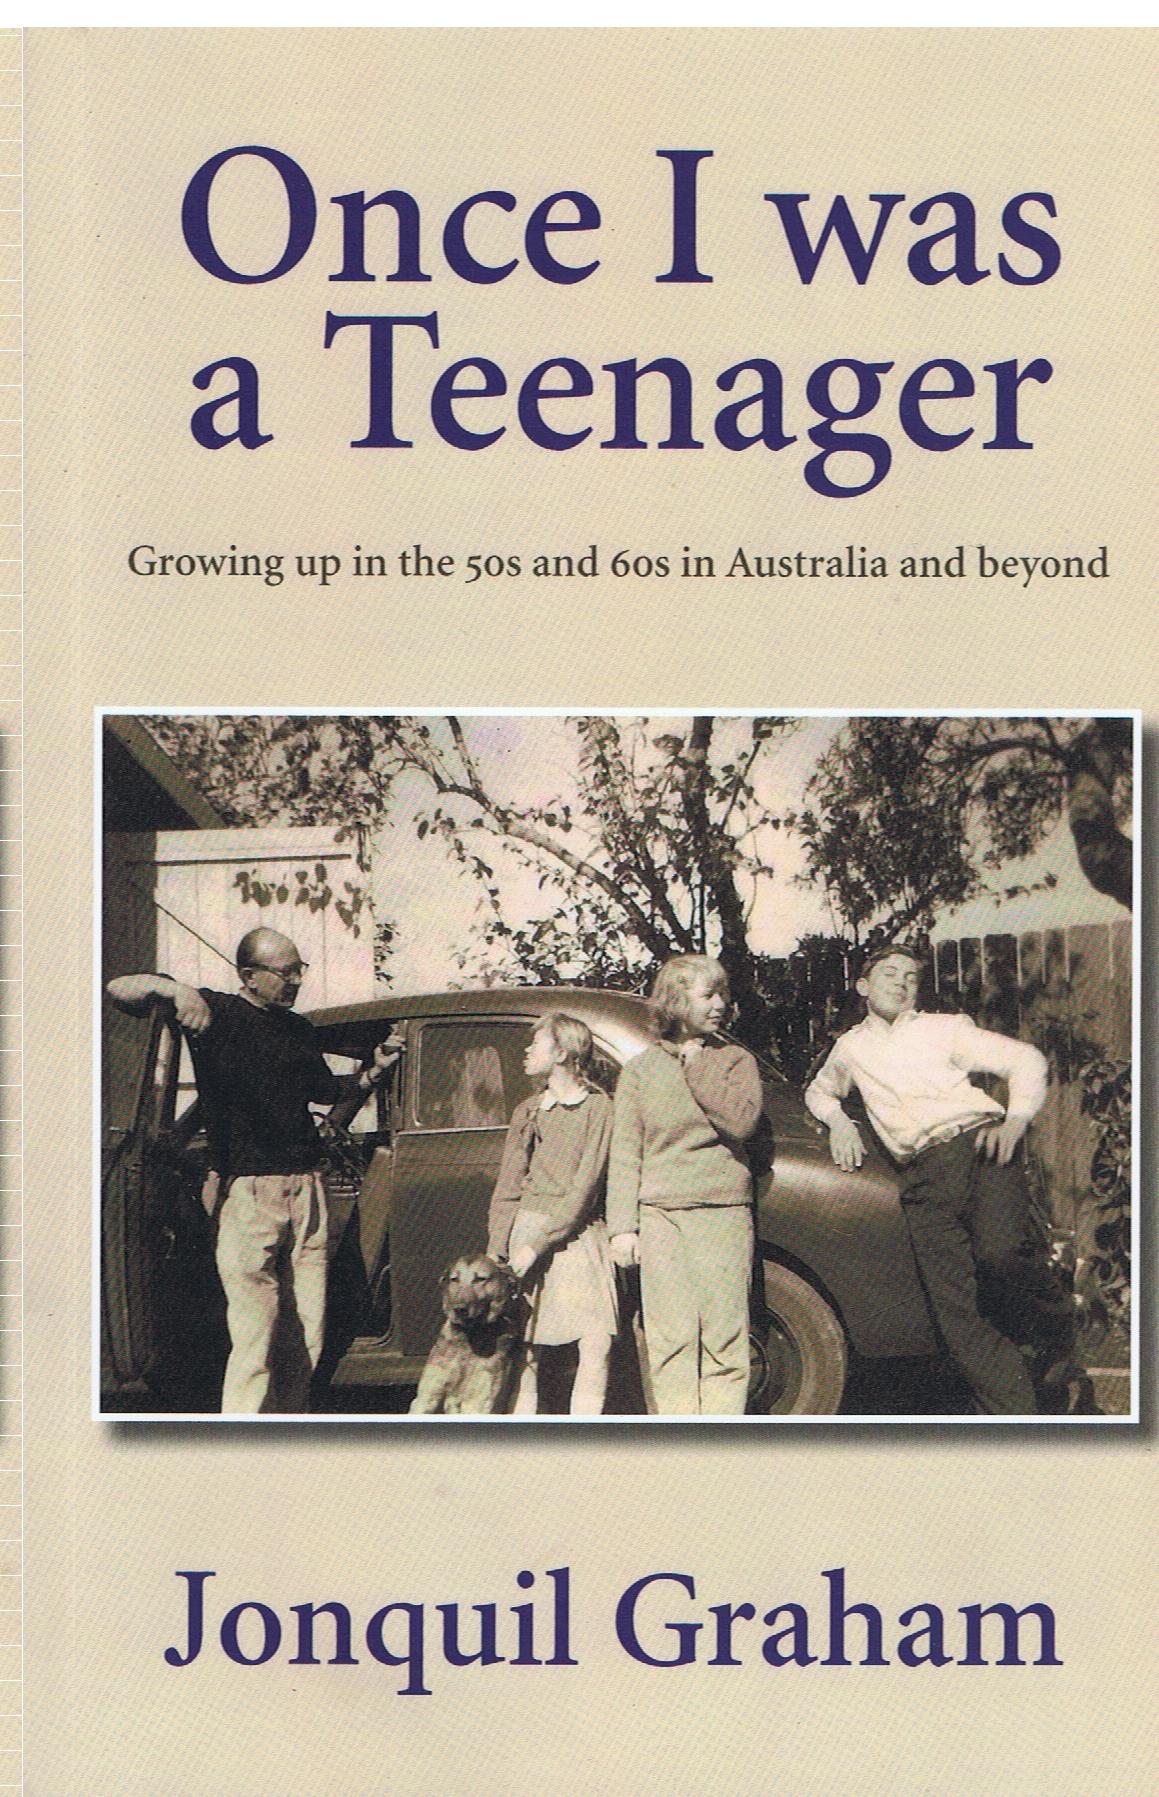 Once I was a Teenager: Growing up in the 50s and 60s in Australia and beyond by Jonquil Graham